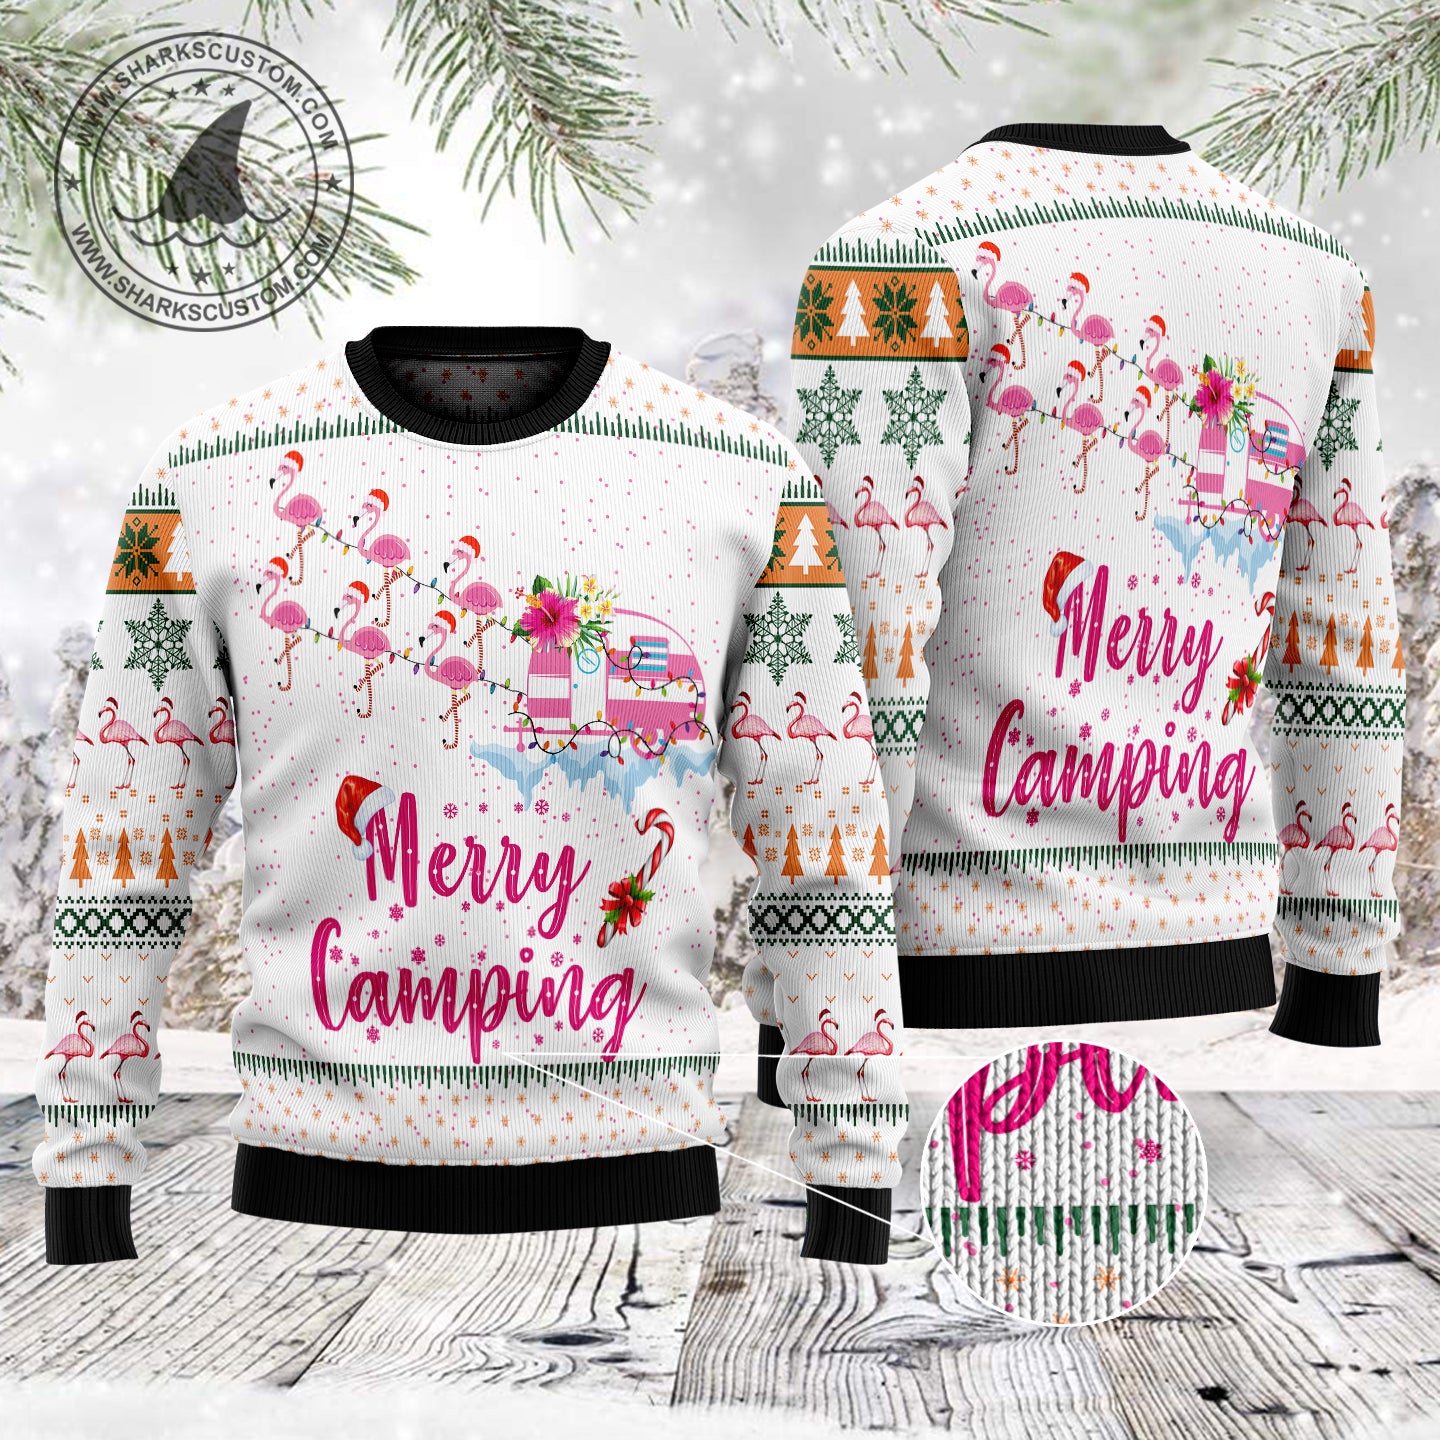 Merry Camping Flamingo TG5128 - Ugly Christmas Sweater unisex womens & mens, couples matching, friends, flamingo lover, funny family sweater gifts (plus size available)